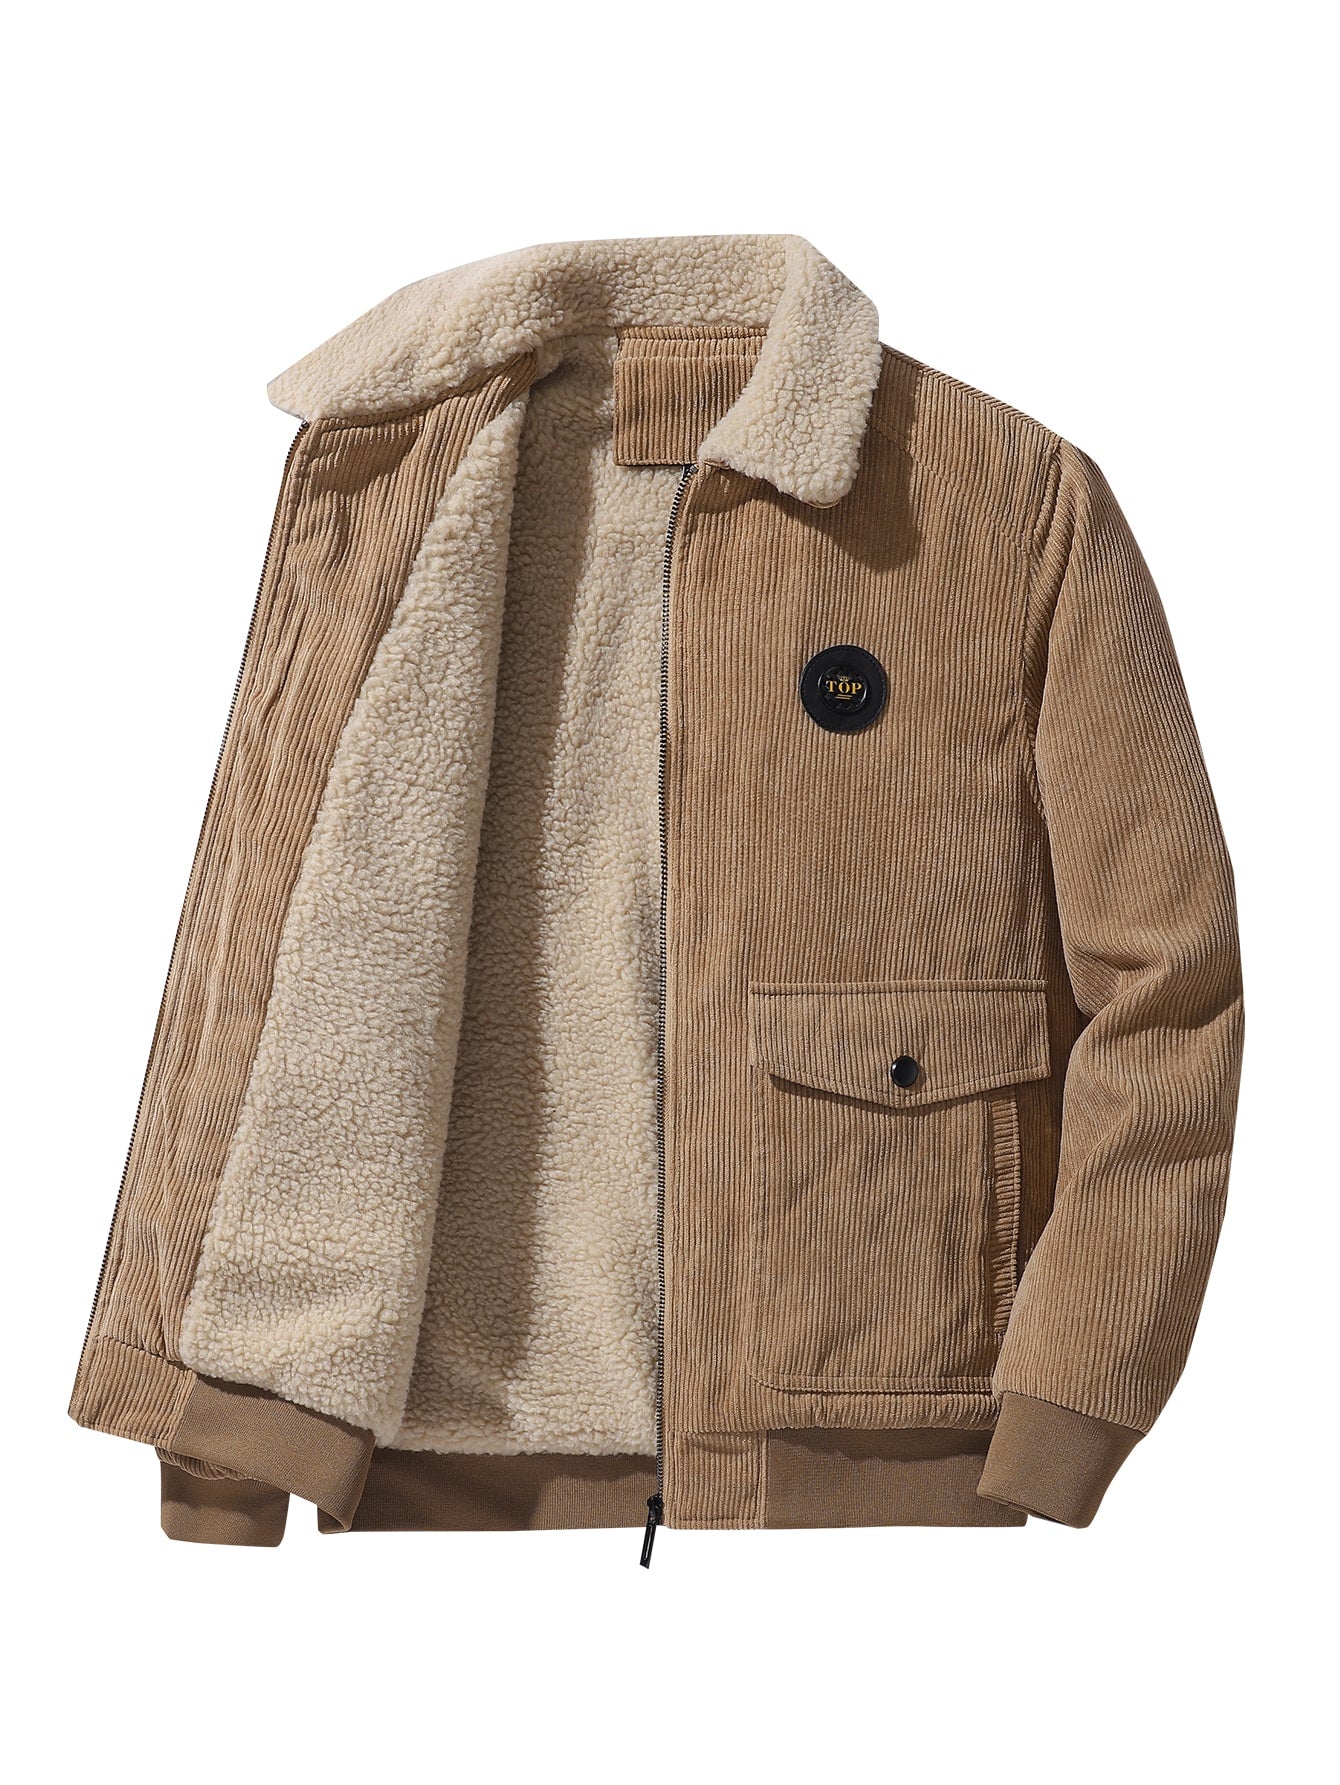 Loose Fit Men's Corduroy Jacket With Letter Patches And Flap Pockets